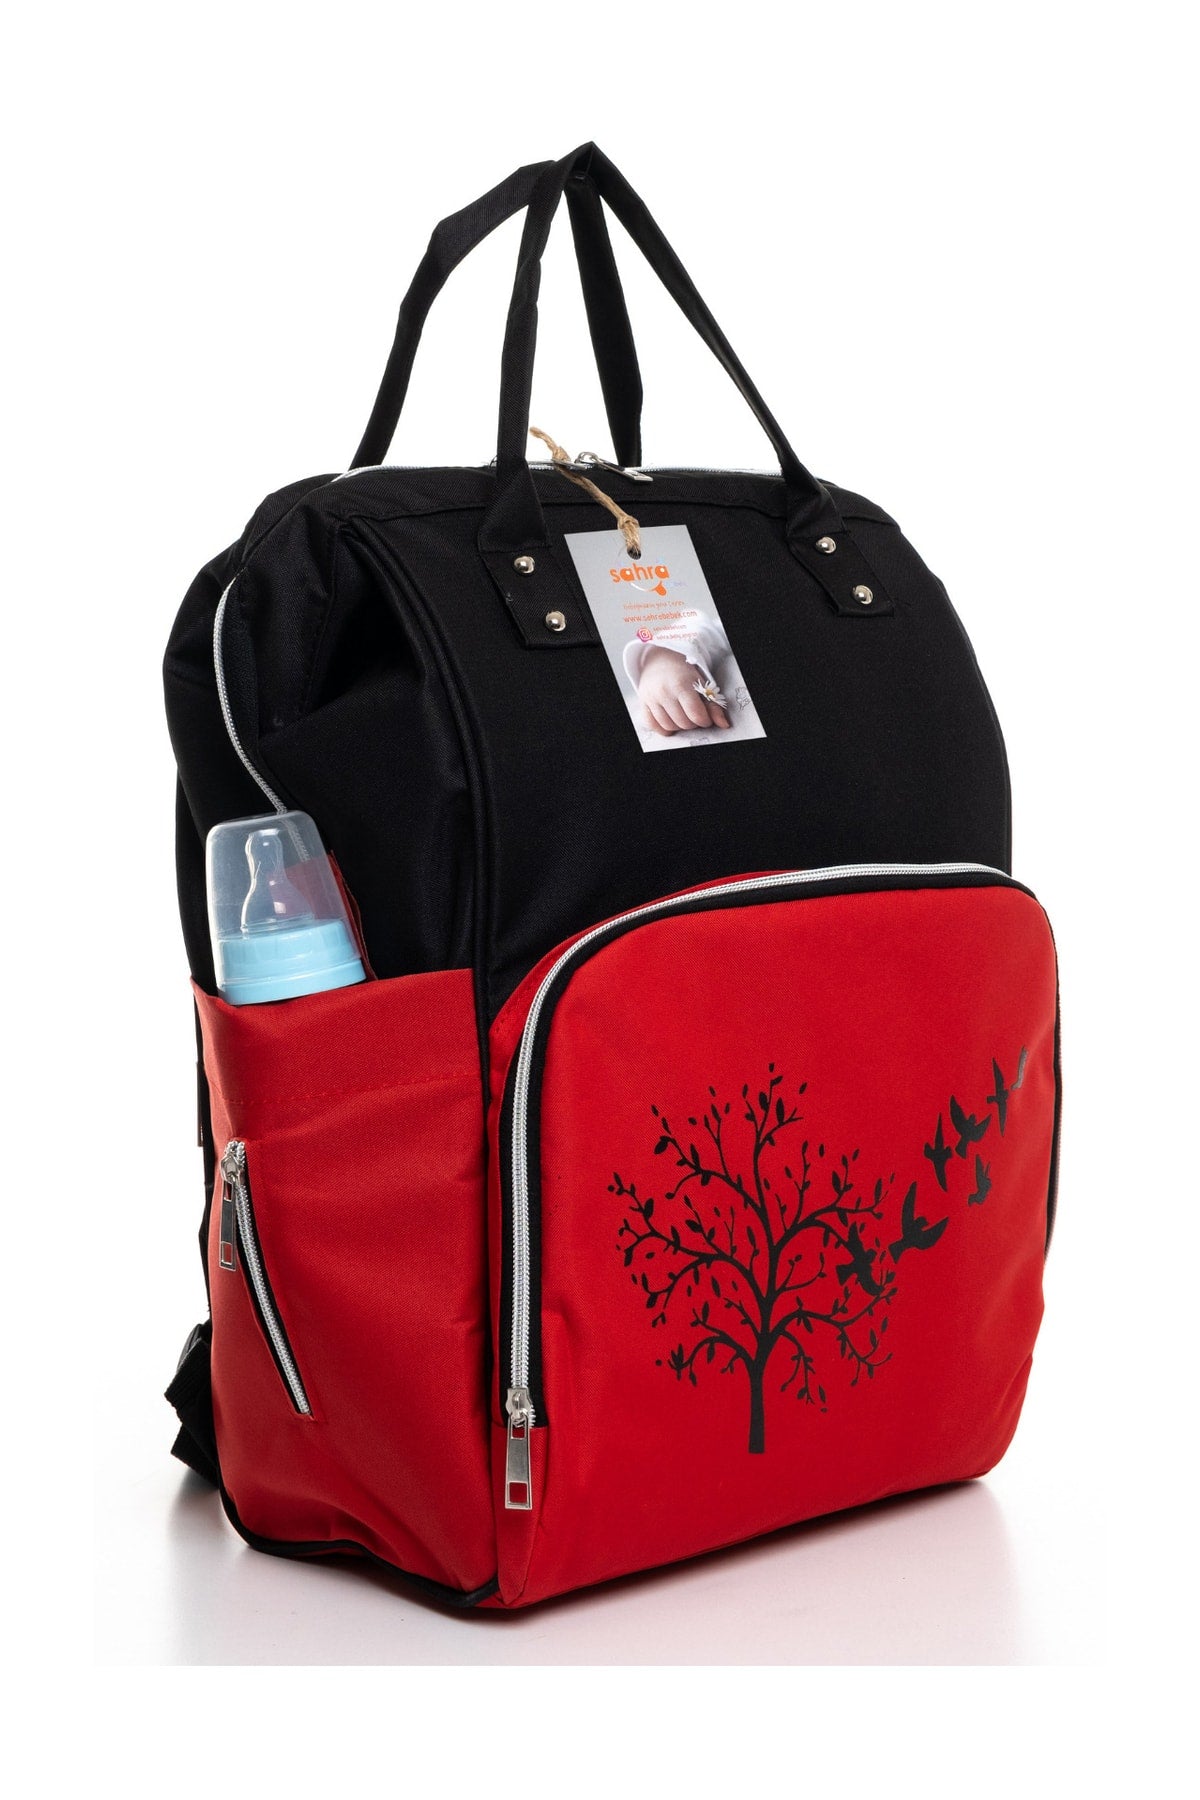 Stain Resistant Waterproof Thermal Compartment Striped Mother Baby Care Backpack Red-black